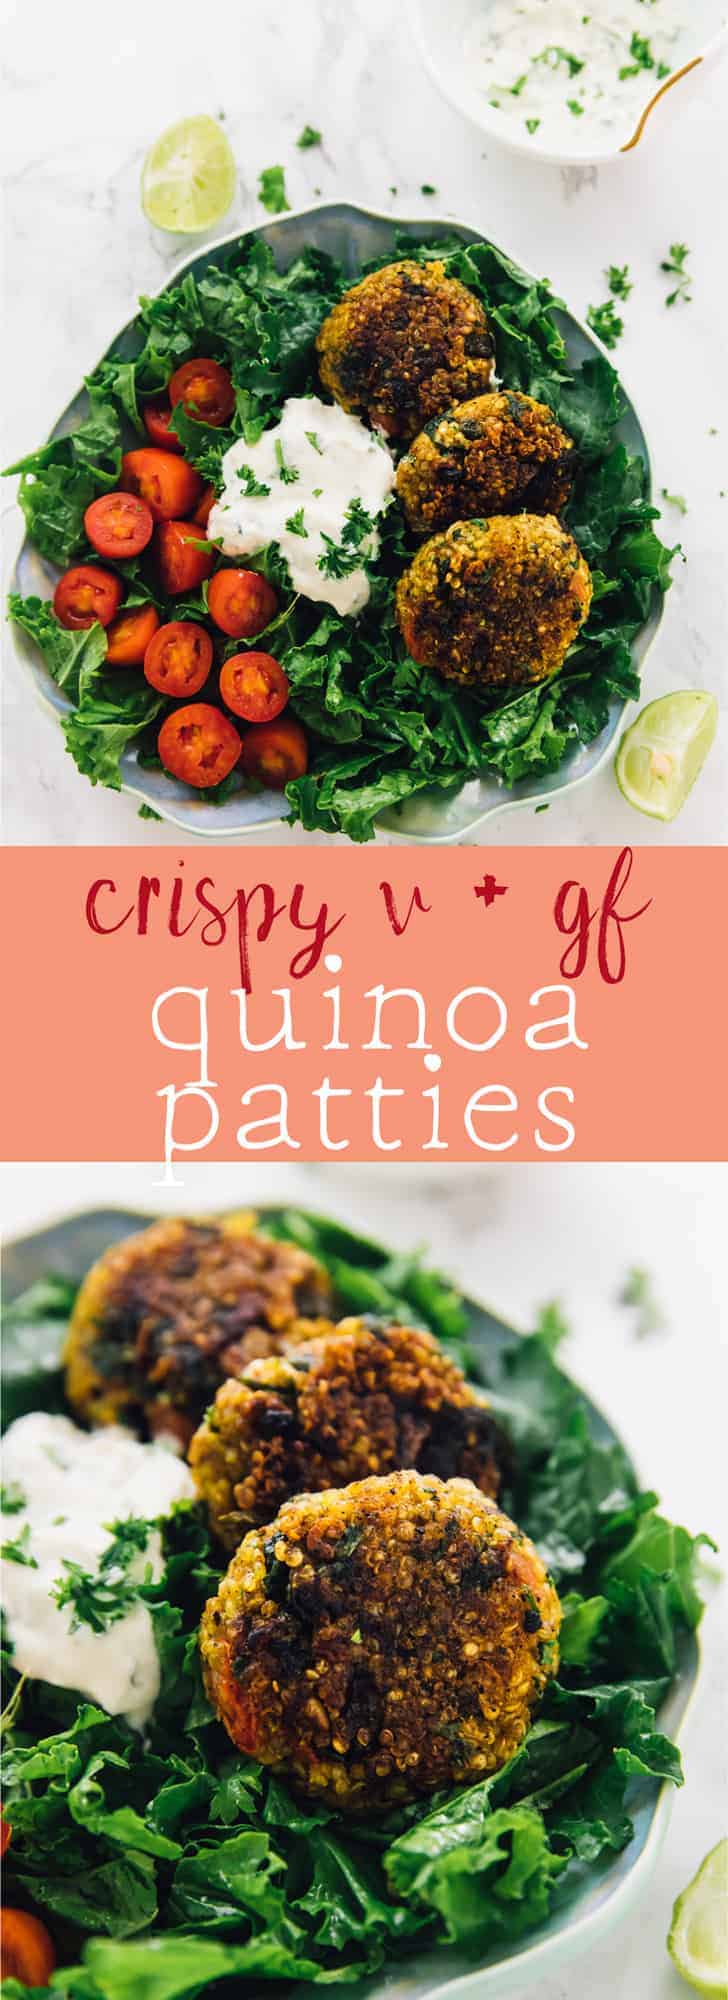 These Crispy Quinoa Patties are so great for meal prep! They are made with spinach and tomatoes, are vegan and gluten free, and are served with a divine vegan yogurt tahini sauce! via https://jessicainthekitchen.com